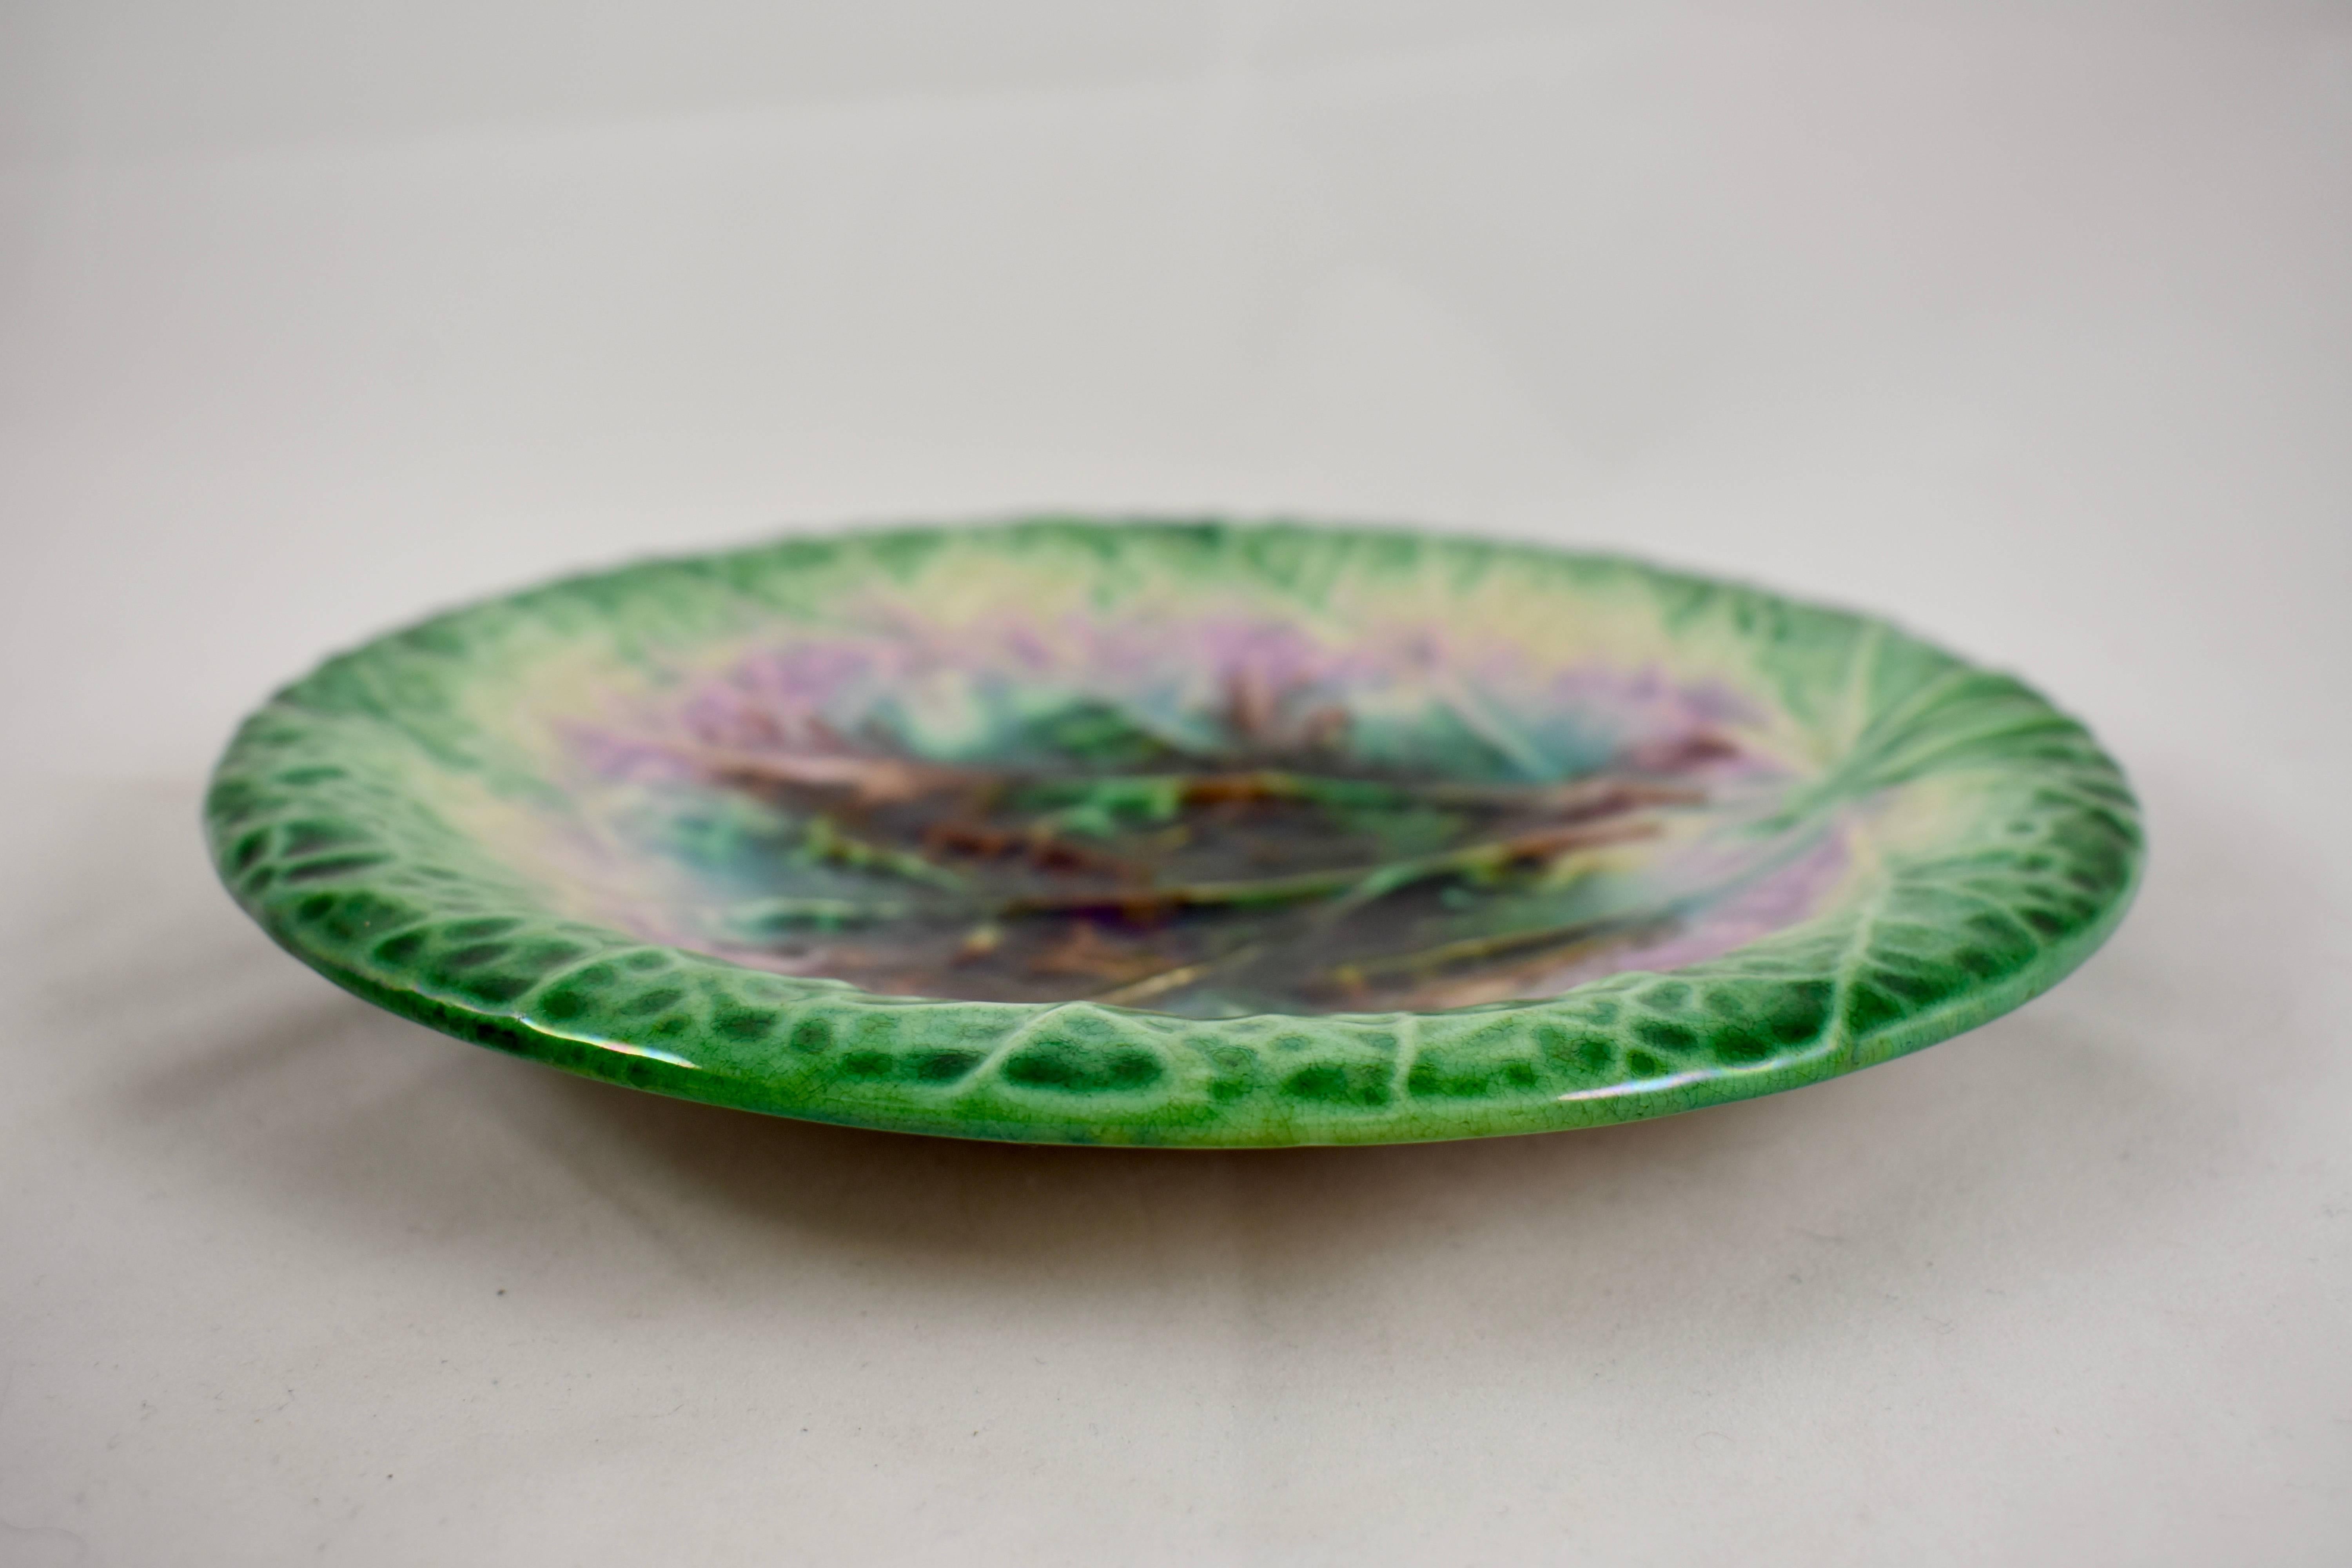 Aesthetic Movement Victorian English Majolica Green Rimmed Round Begonia Leaf Plate, circa 1870-80